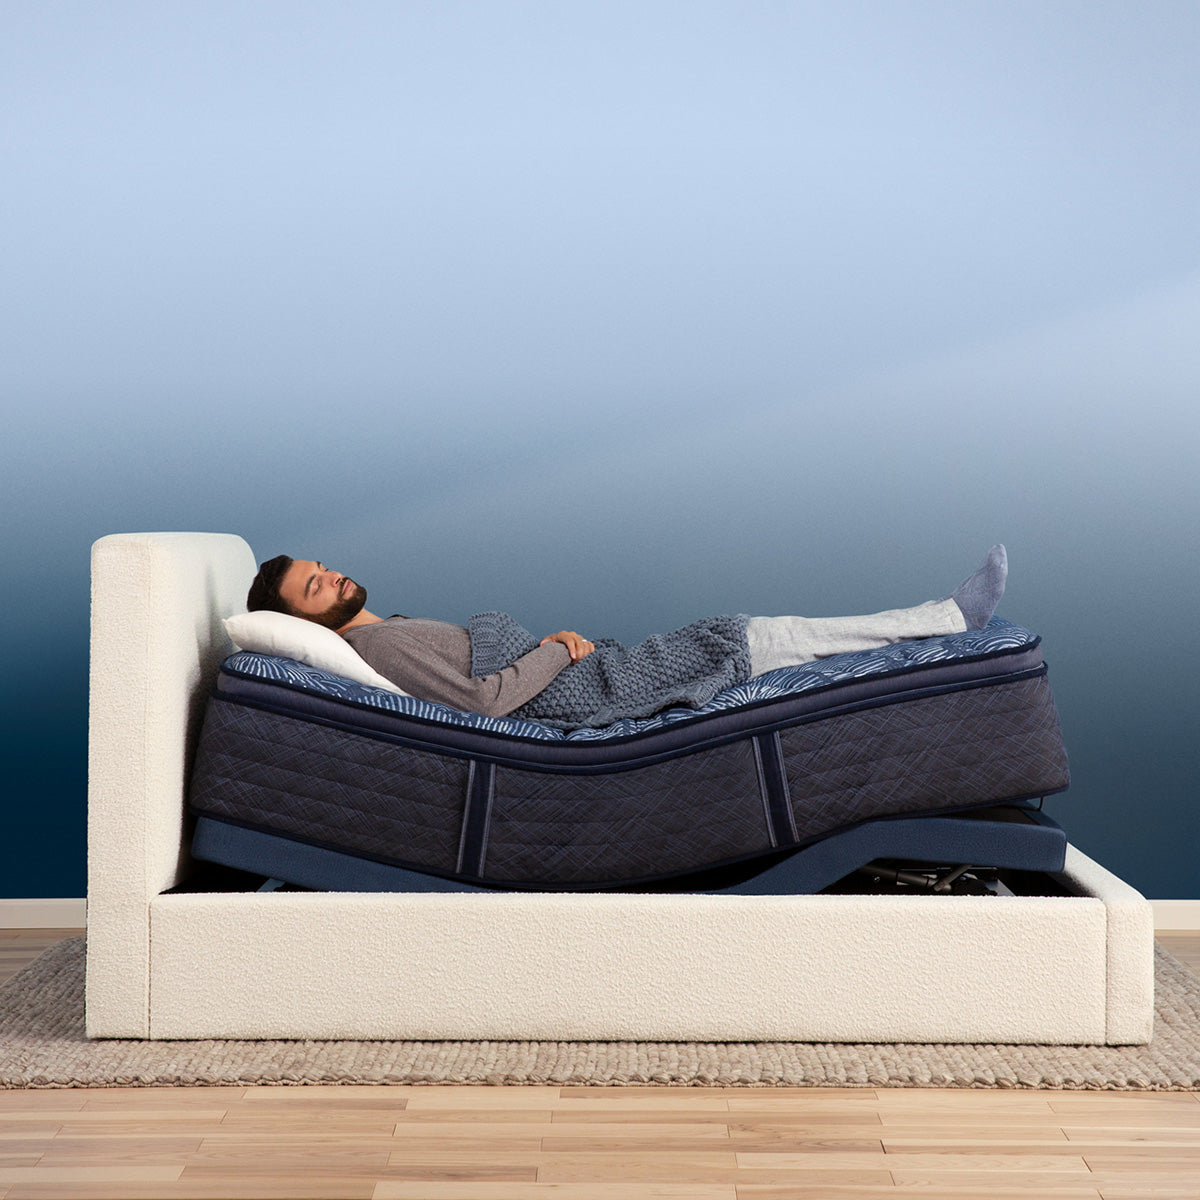 Man laying on mattress elevated by a Serta Motion Essentials Adjustable Base